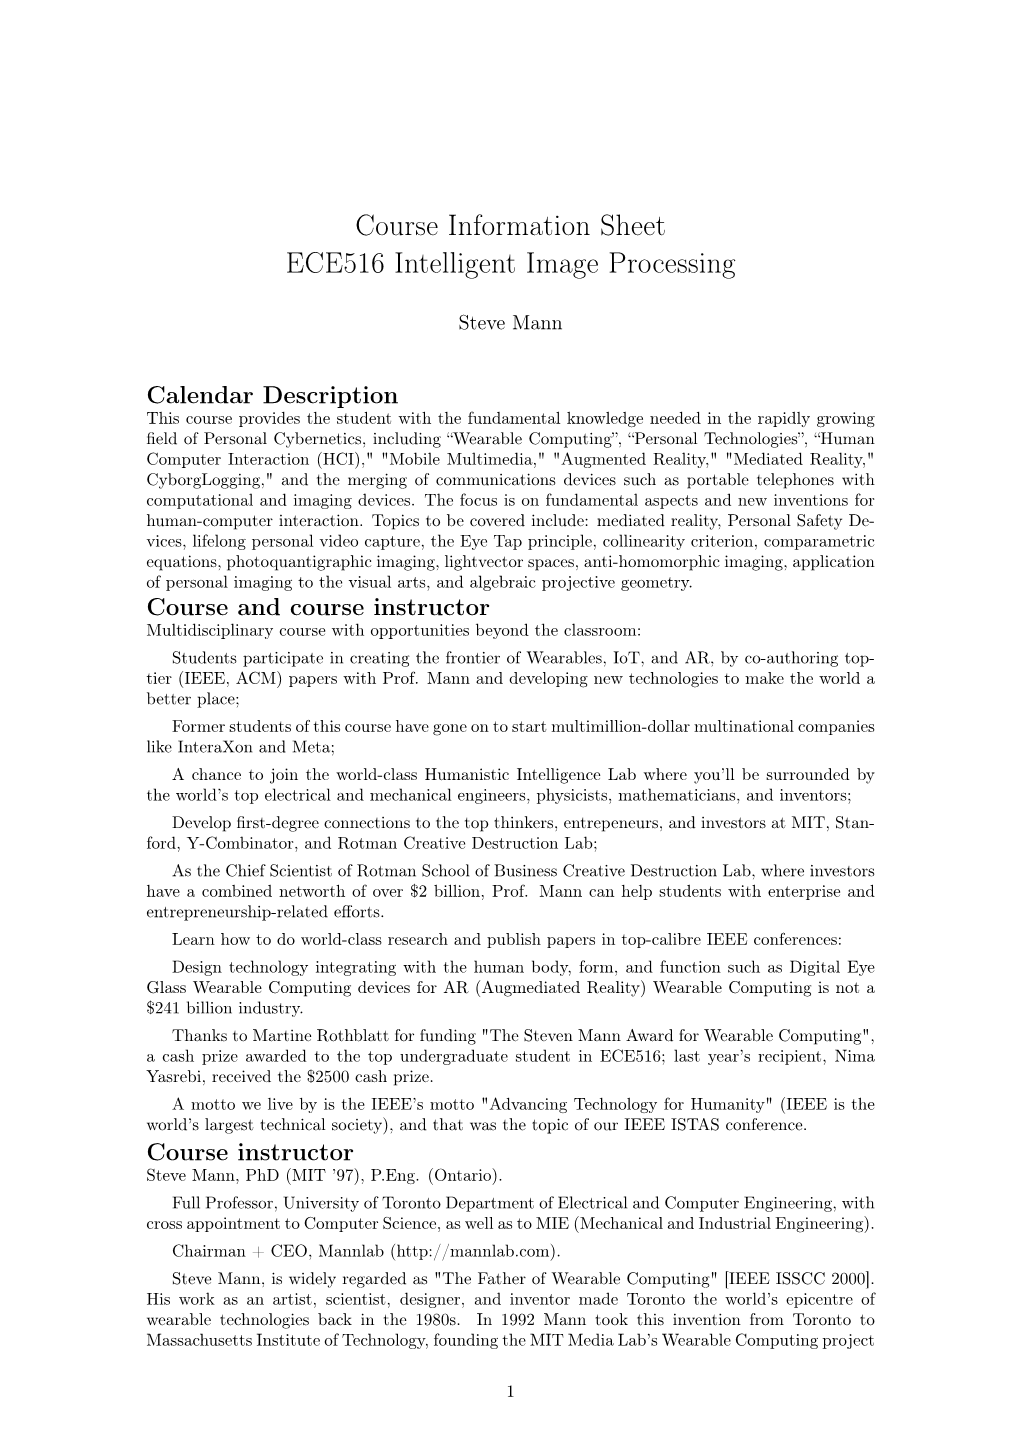 Course Information Sheet ECE516 Intelligent Image Processing